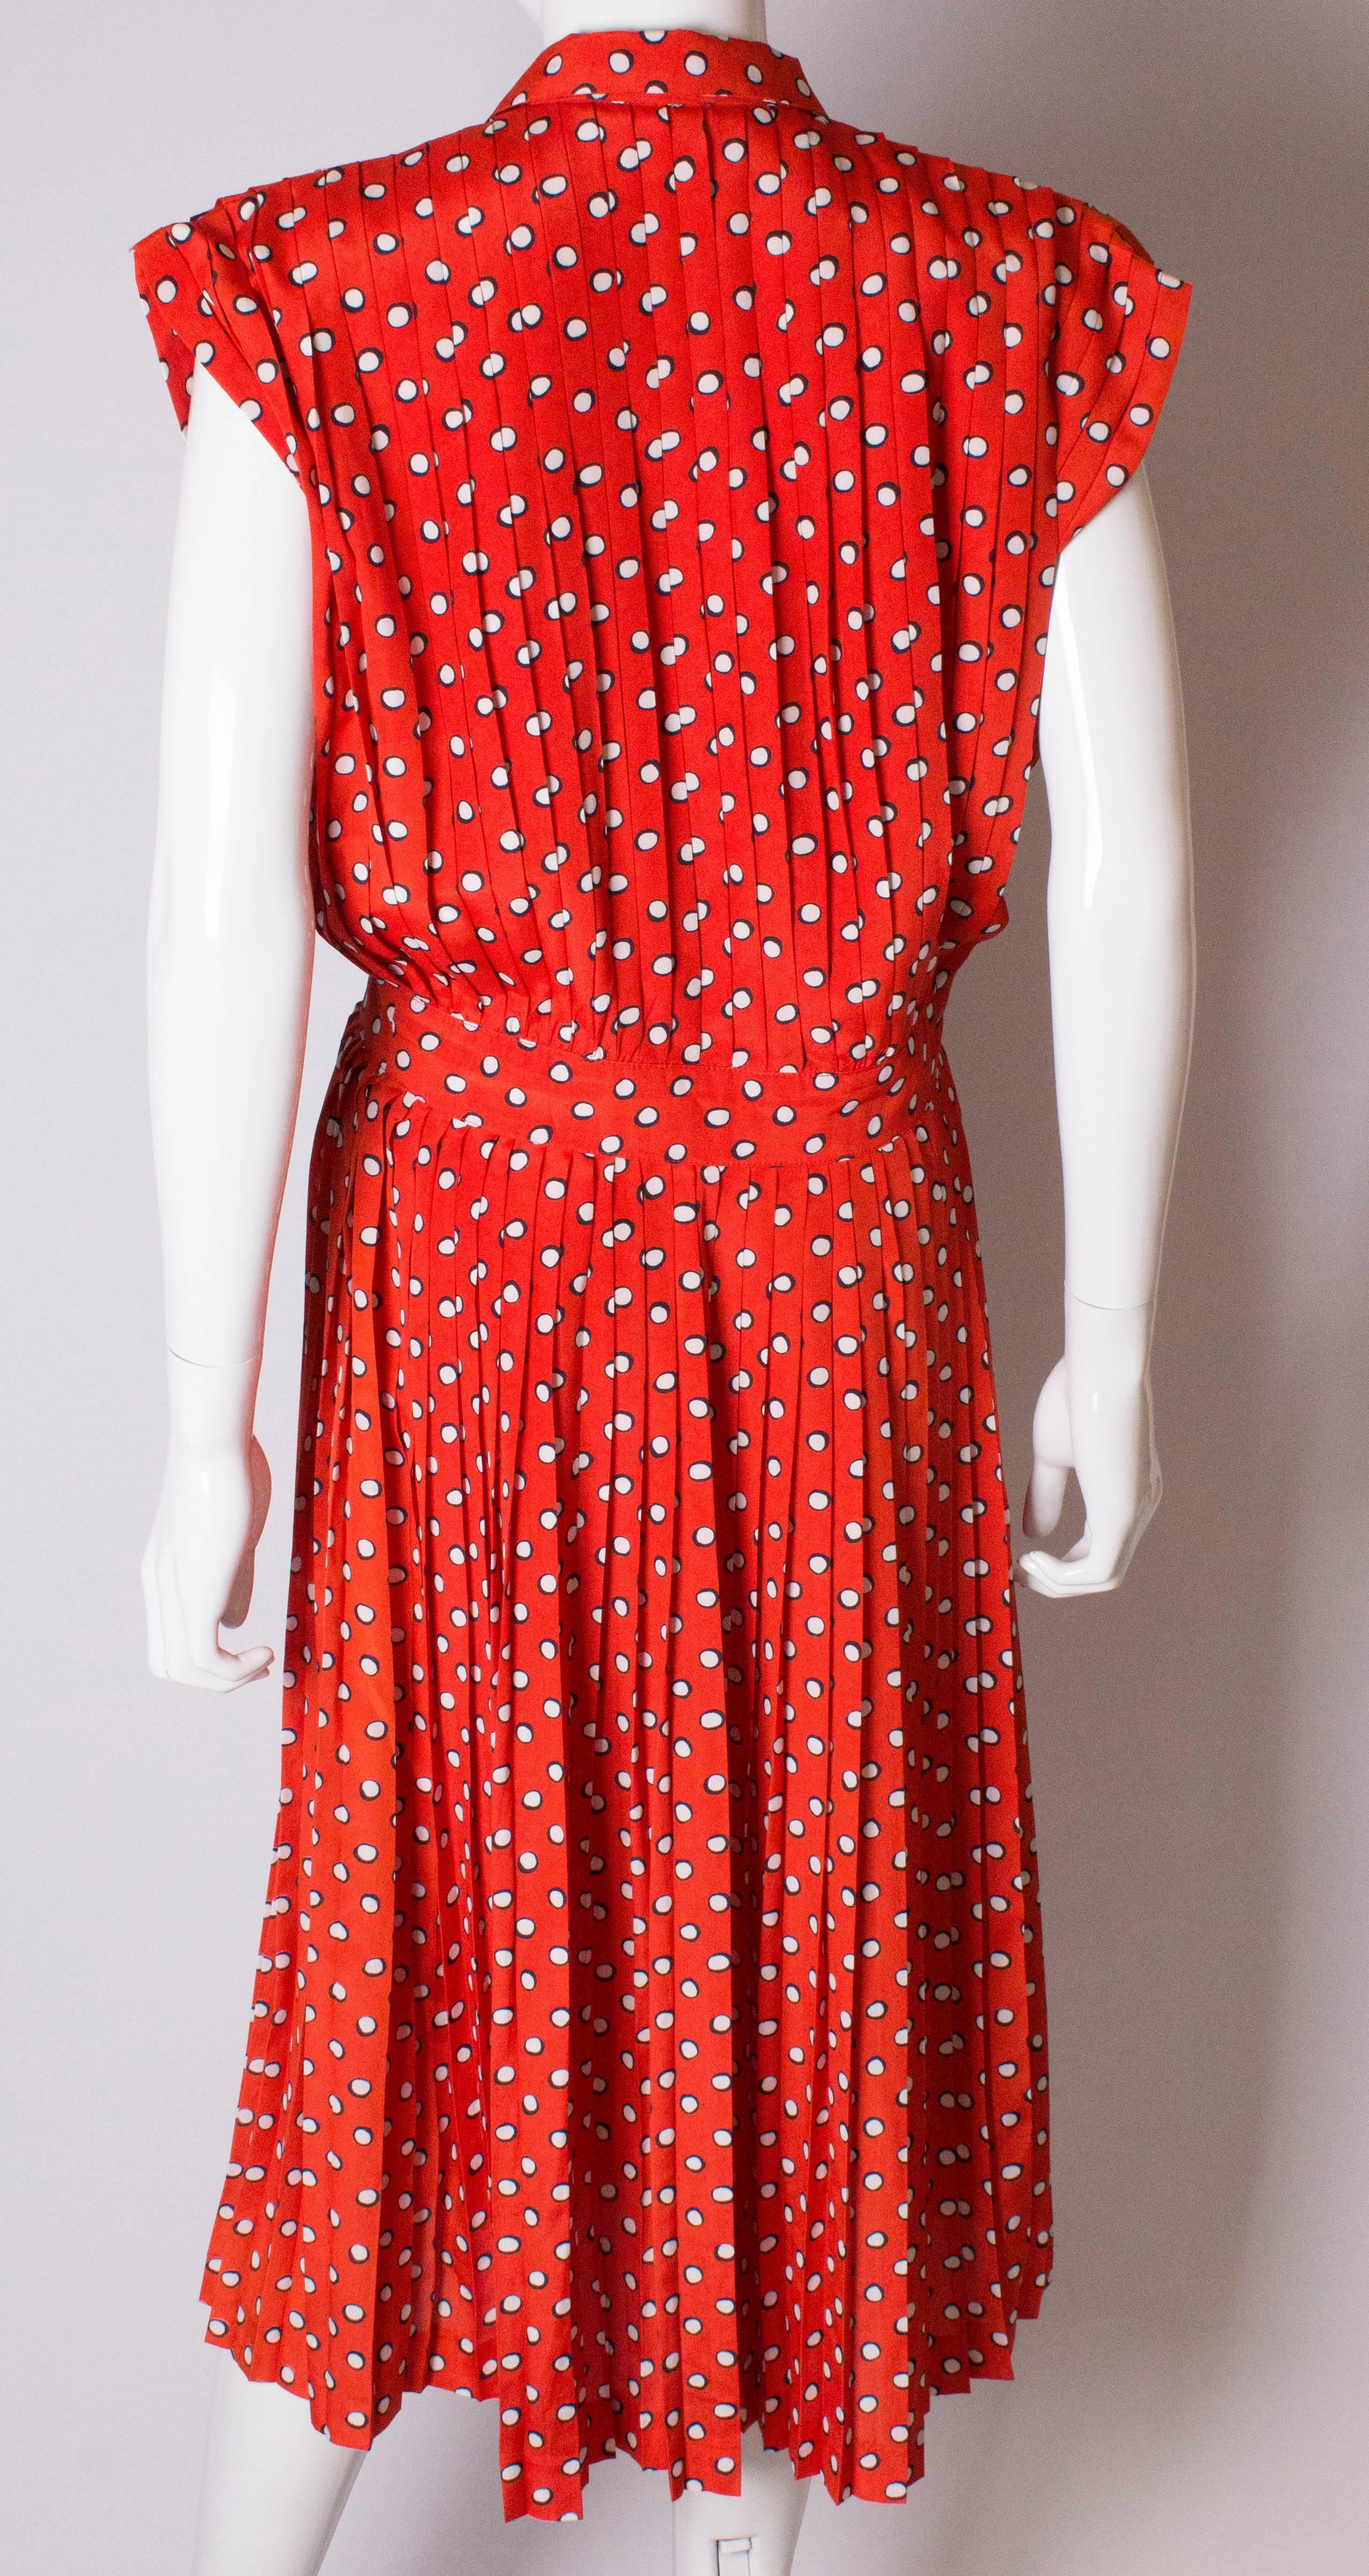 Georges Rechs Spotty Pleated Dress 1970s 3